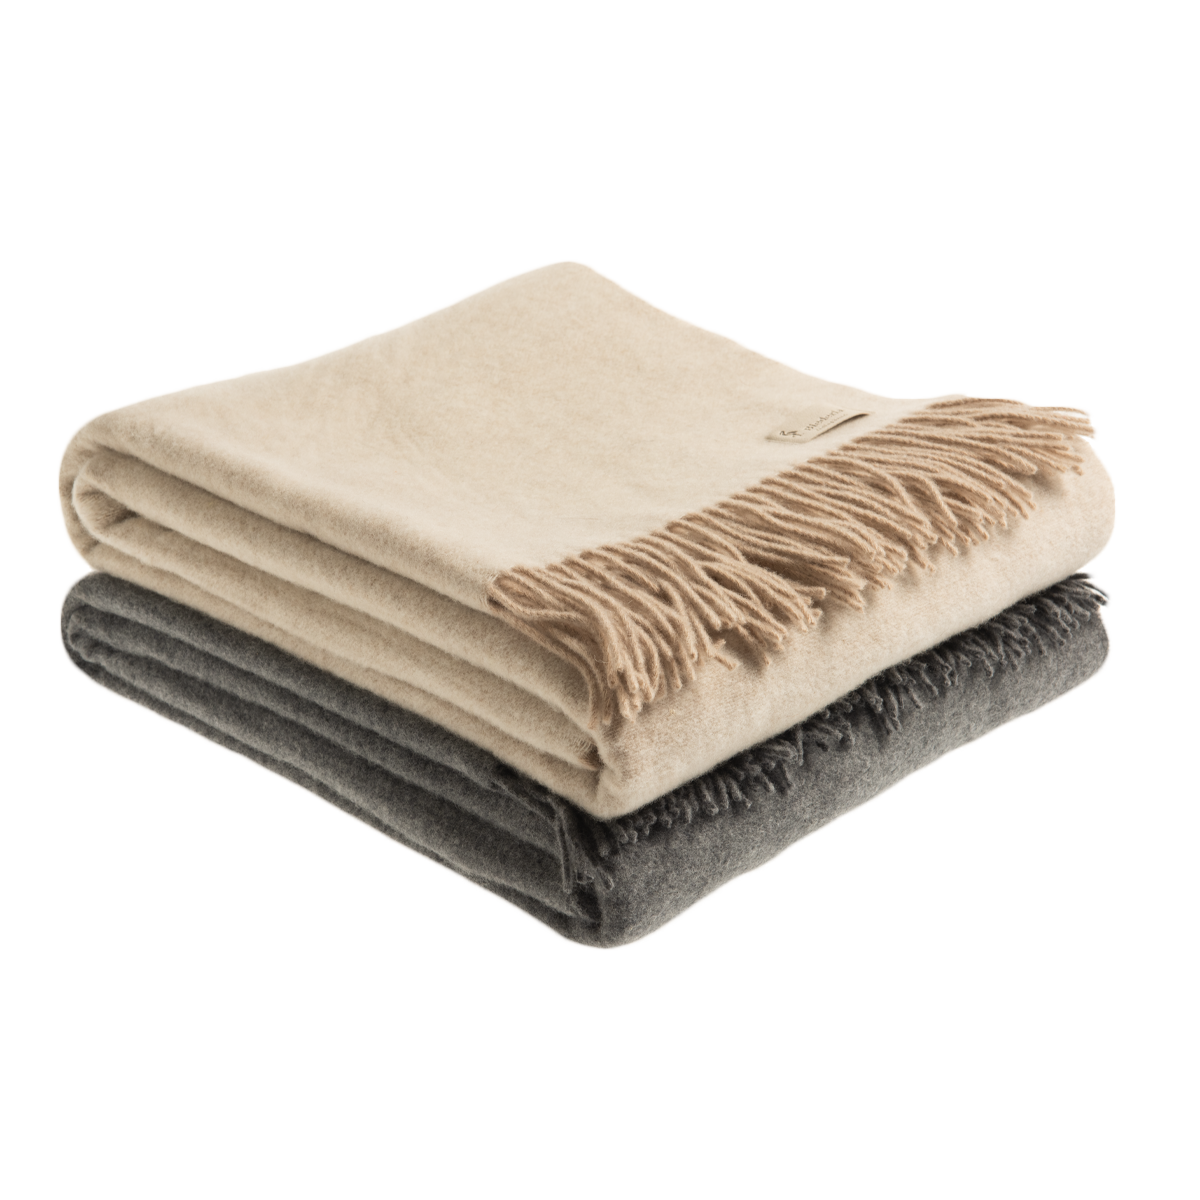 Cashmere wool throws